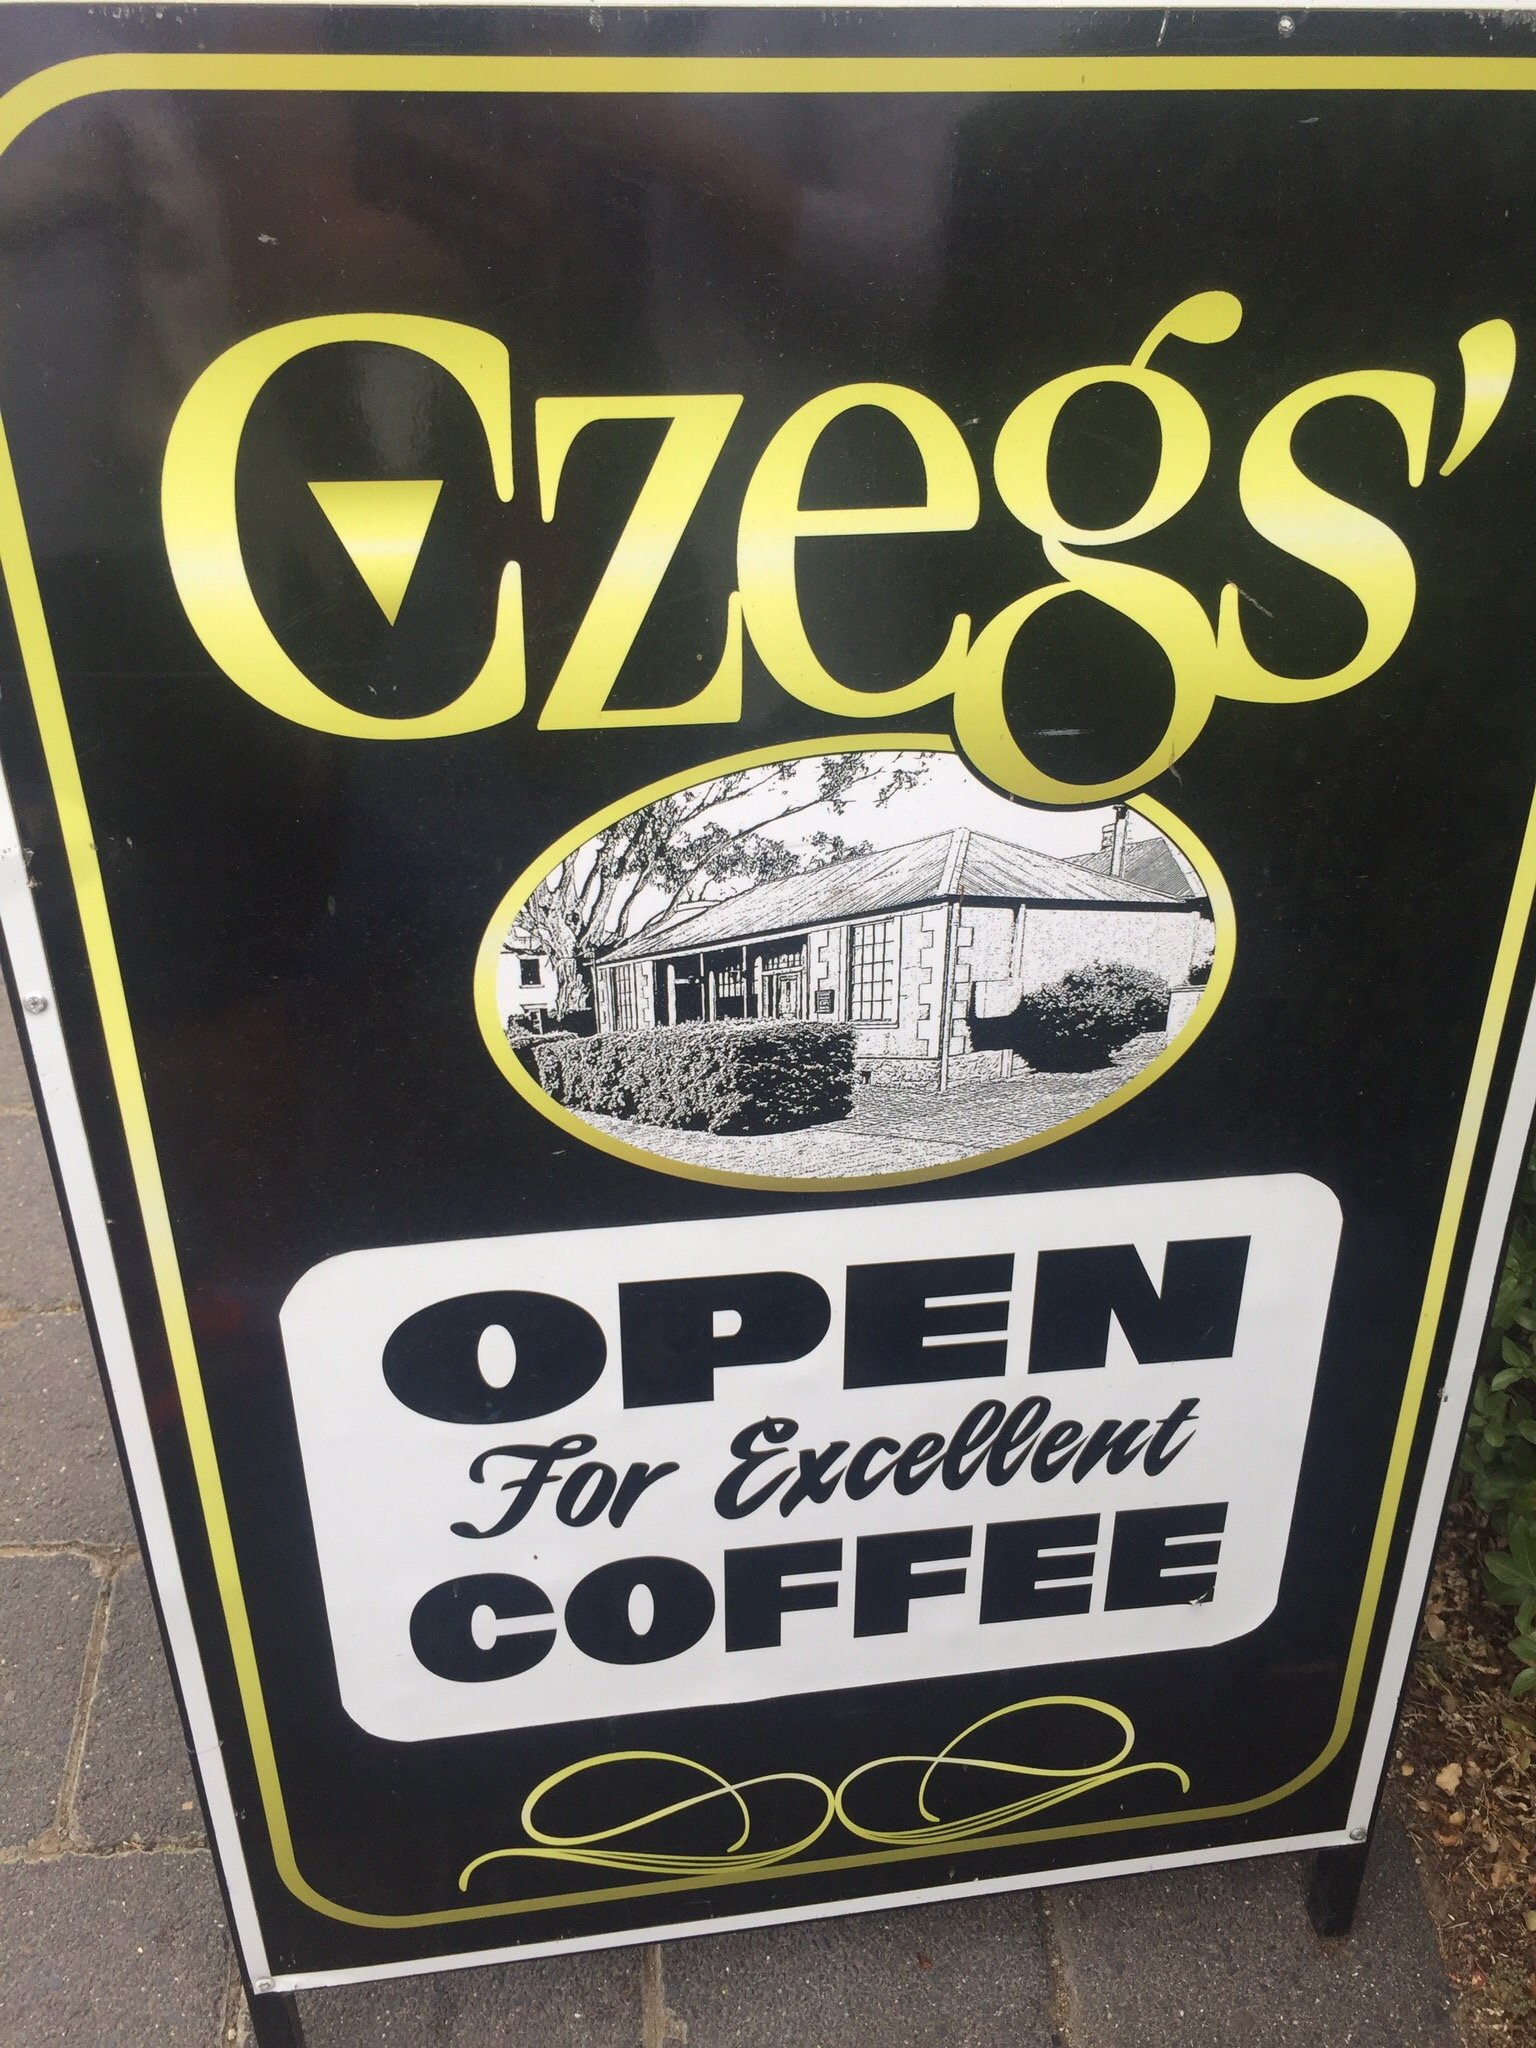 Czegs' Cafe - Northern Rivers Accommodation